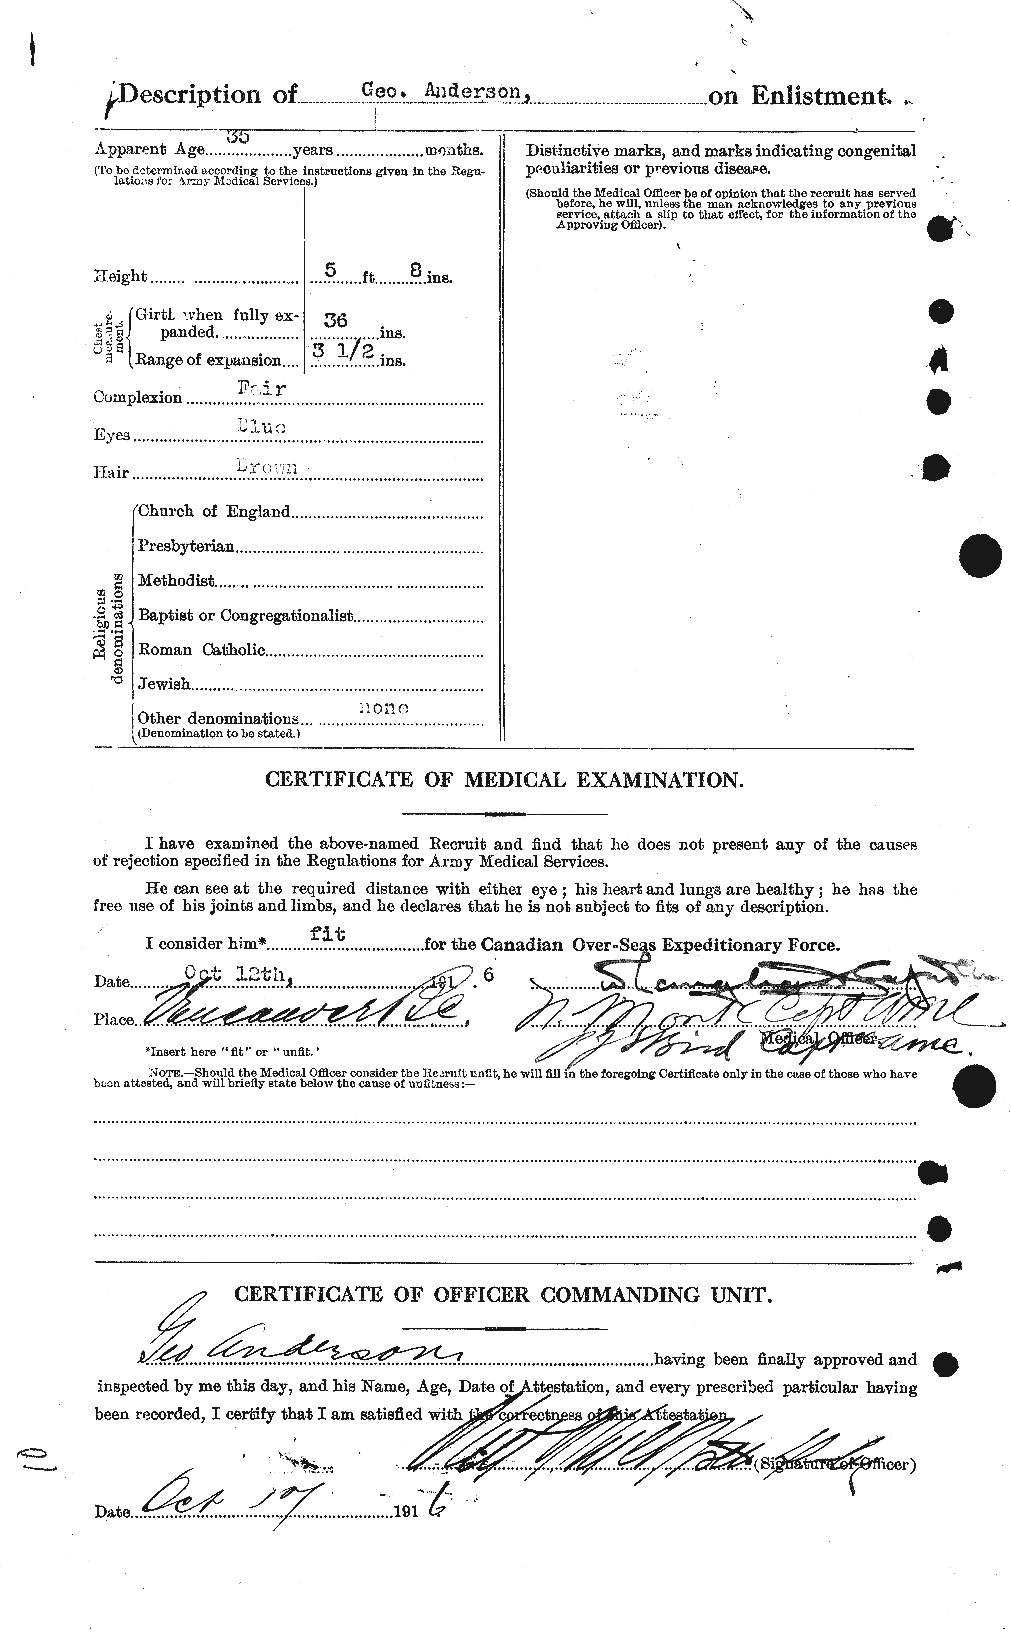 Personnel Records of the First World War - CEF 209781b